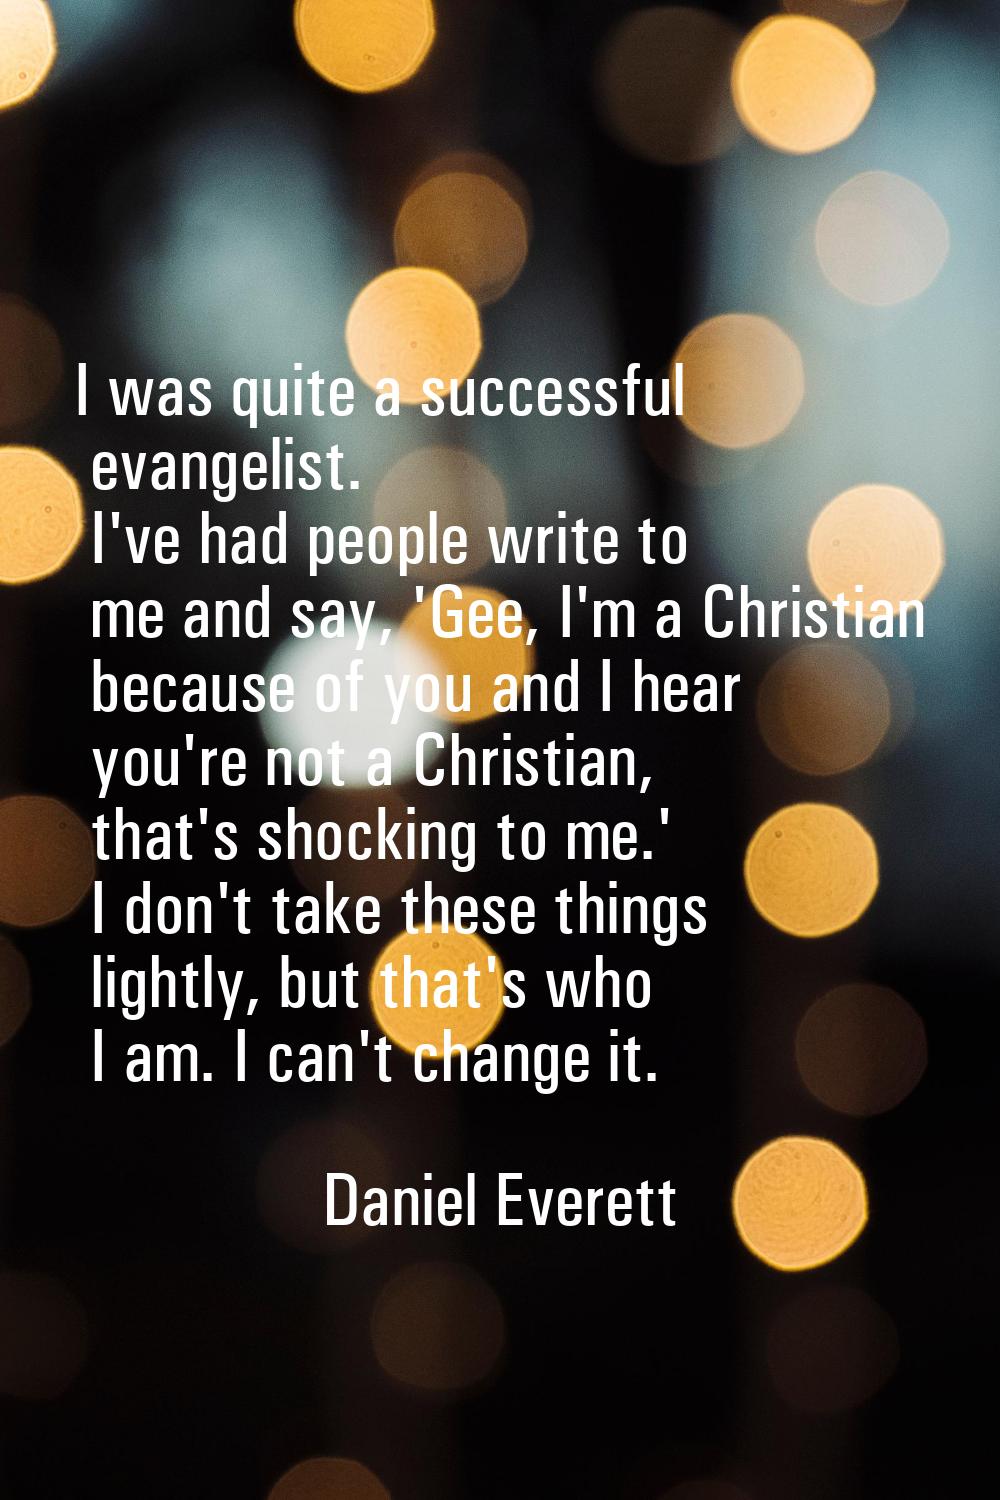 I was quite a successful evangelist. I've had people write to me and say, 'Gee, I'm a Christian bec